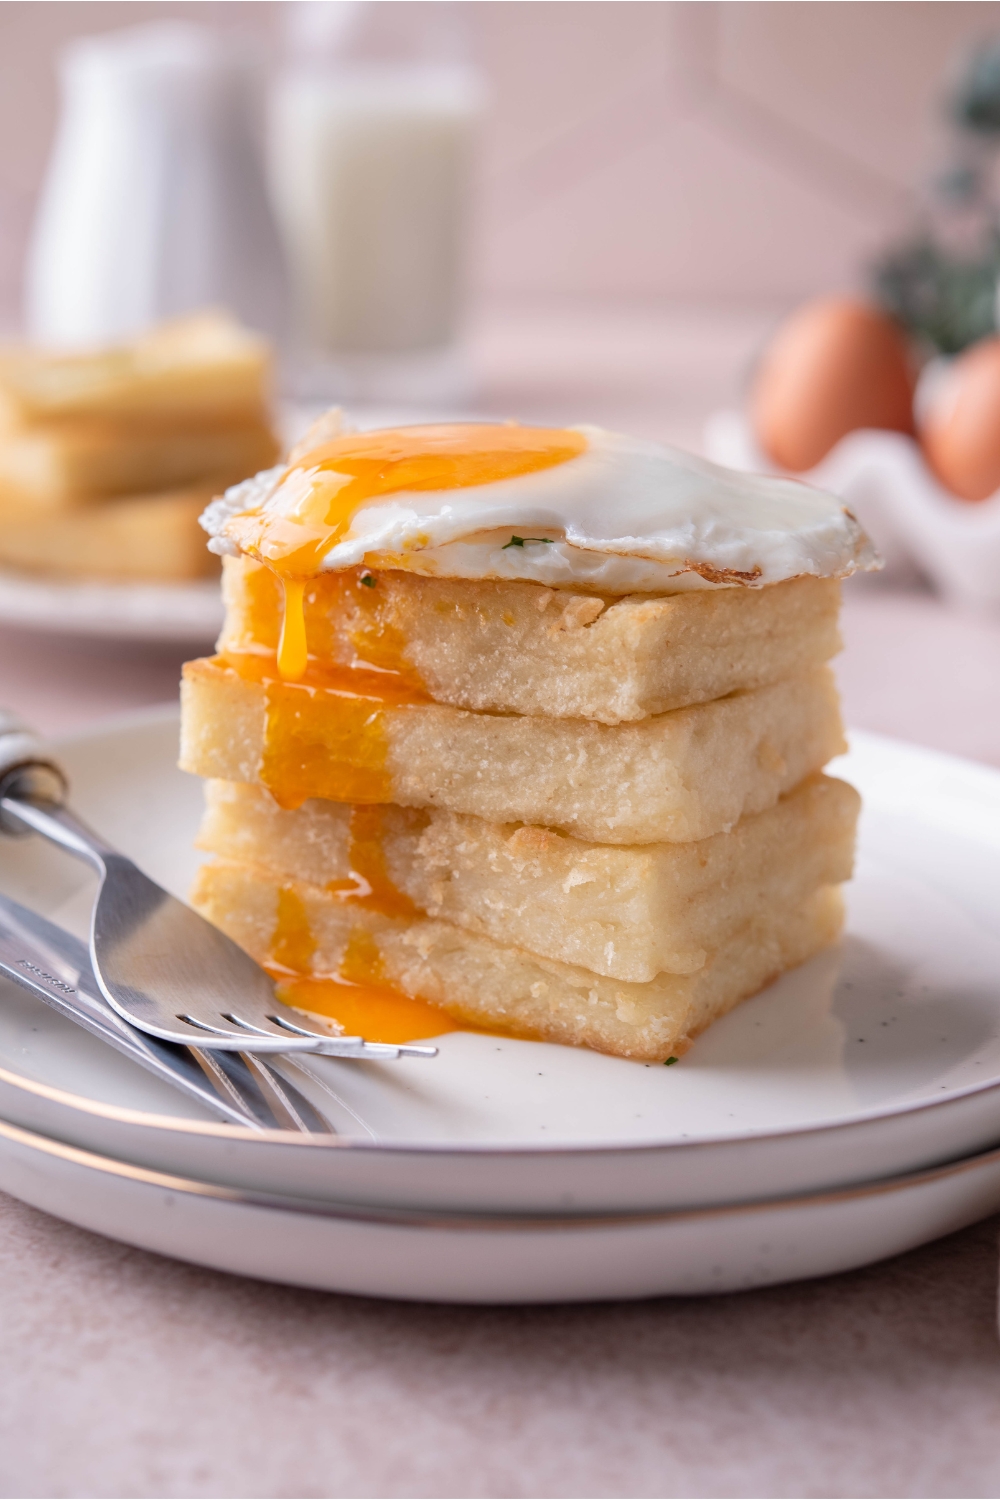 Four grit cakes stacked evenly on top of each other with a sunnyside up egg and the yolk oozing over the grit cakes. There is a set of silverware on the plate.